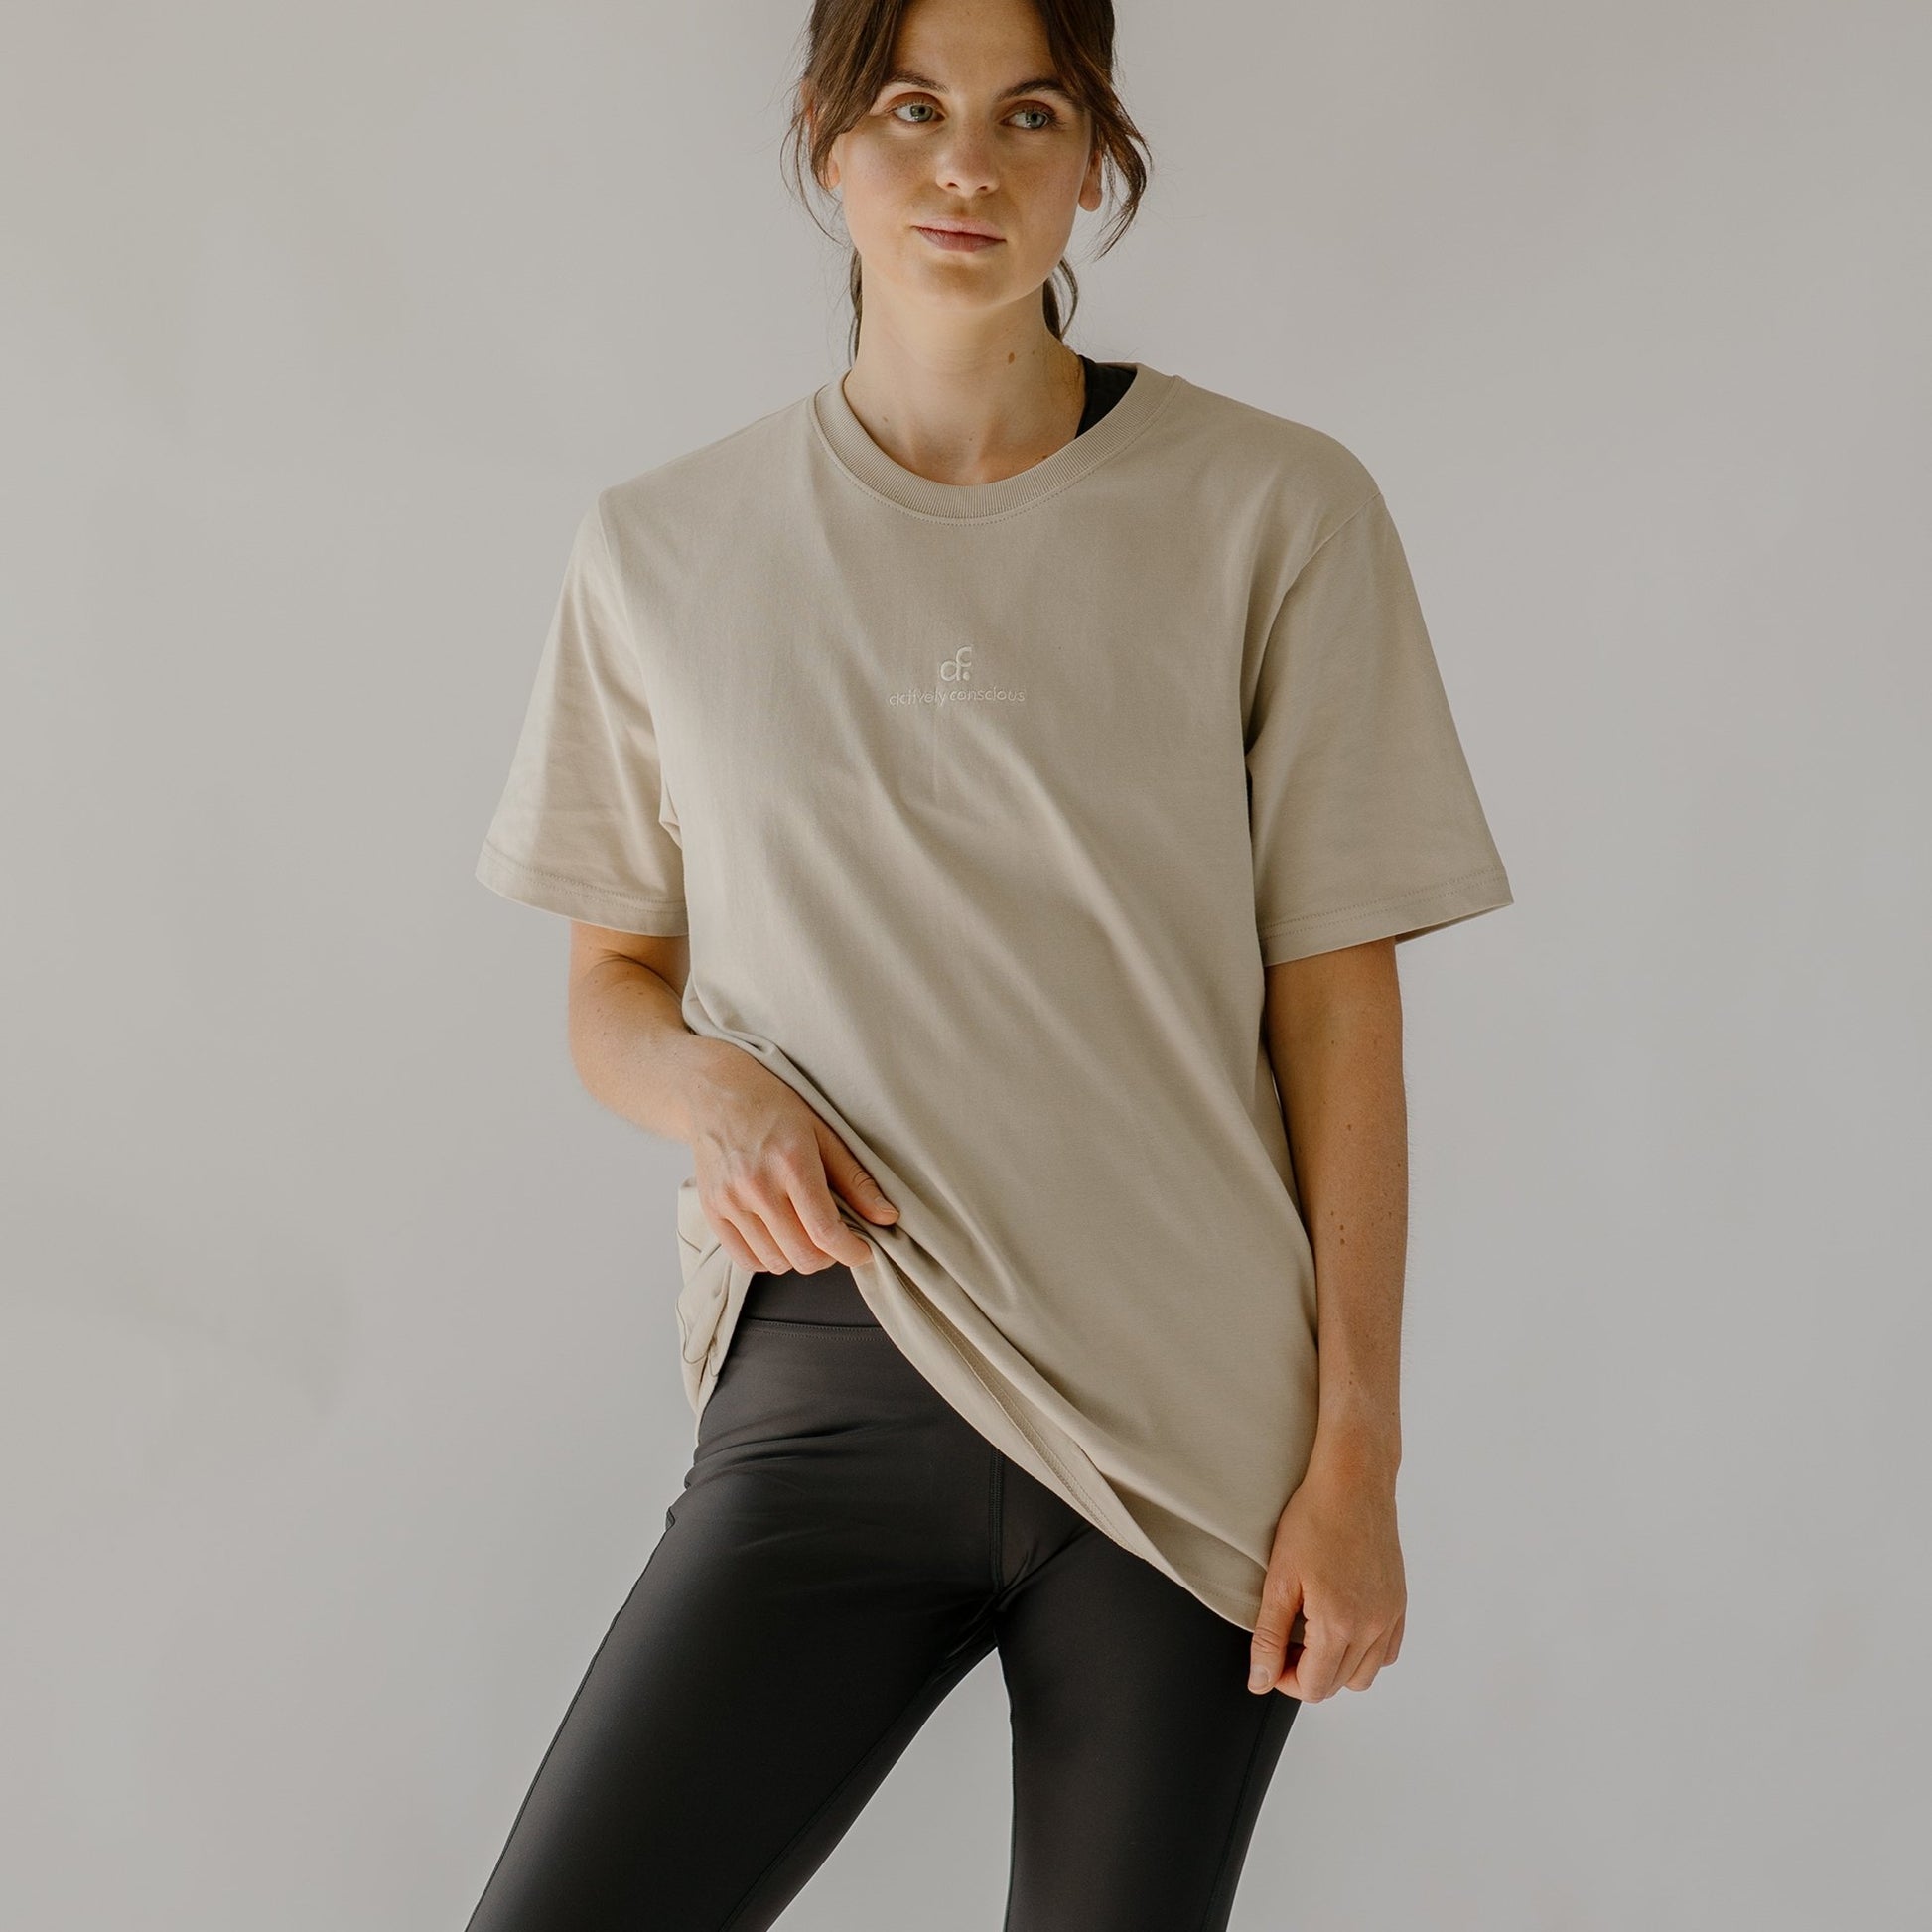 Tonal Embroidered Logo Neutral Heavyweight Tee - Actively Conscious